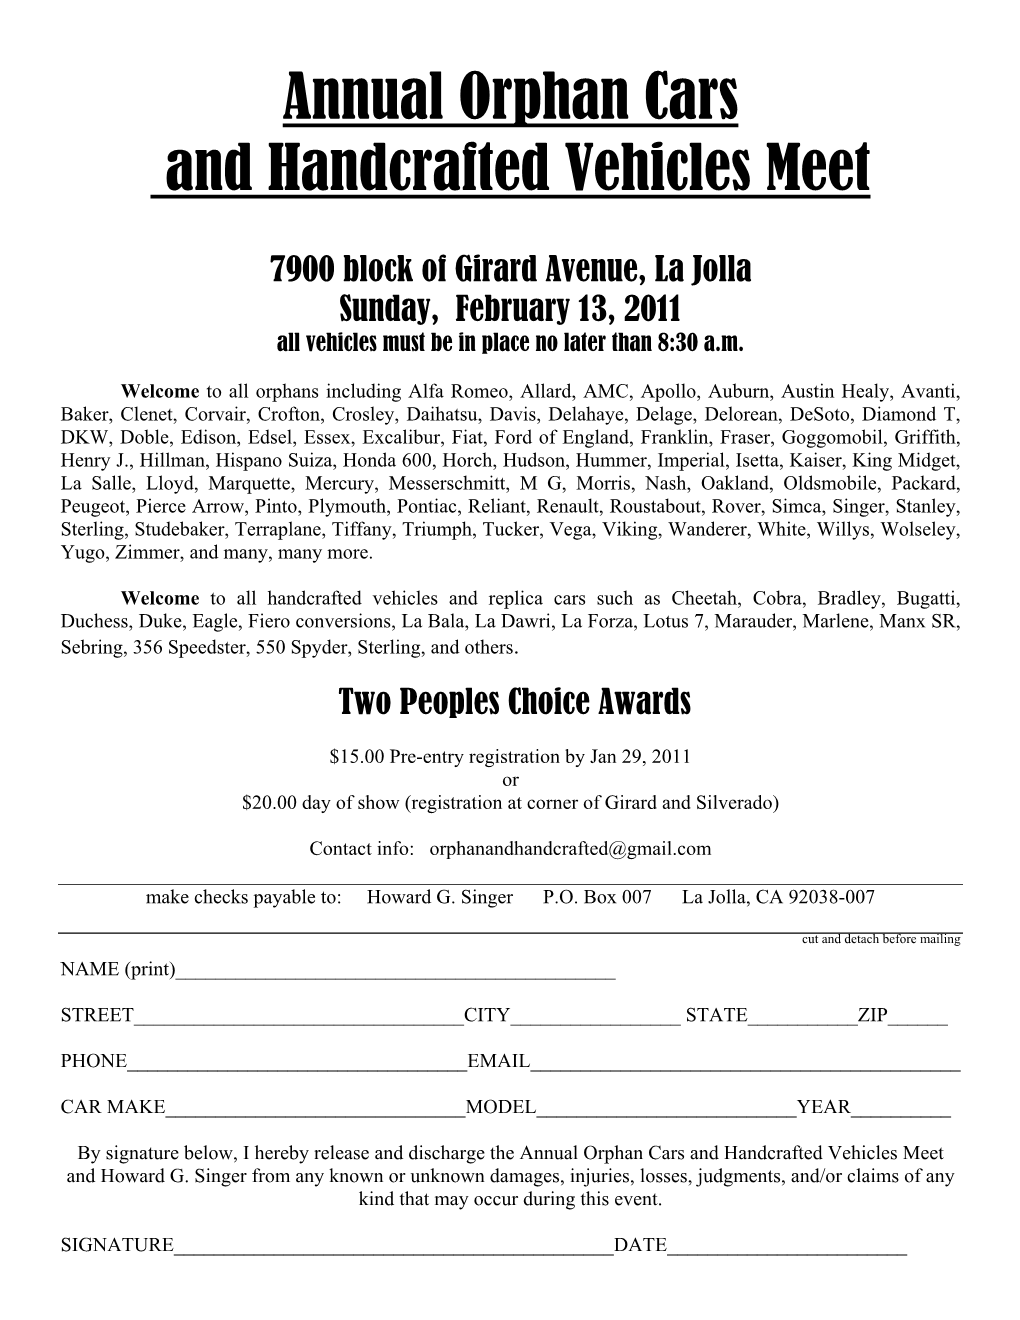 1St Annual Orphan Car and Handcrafted Vehicle Show